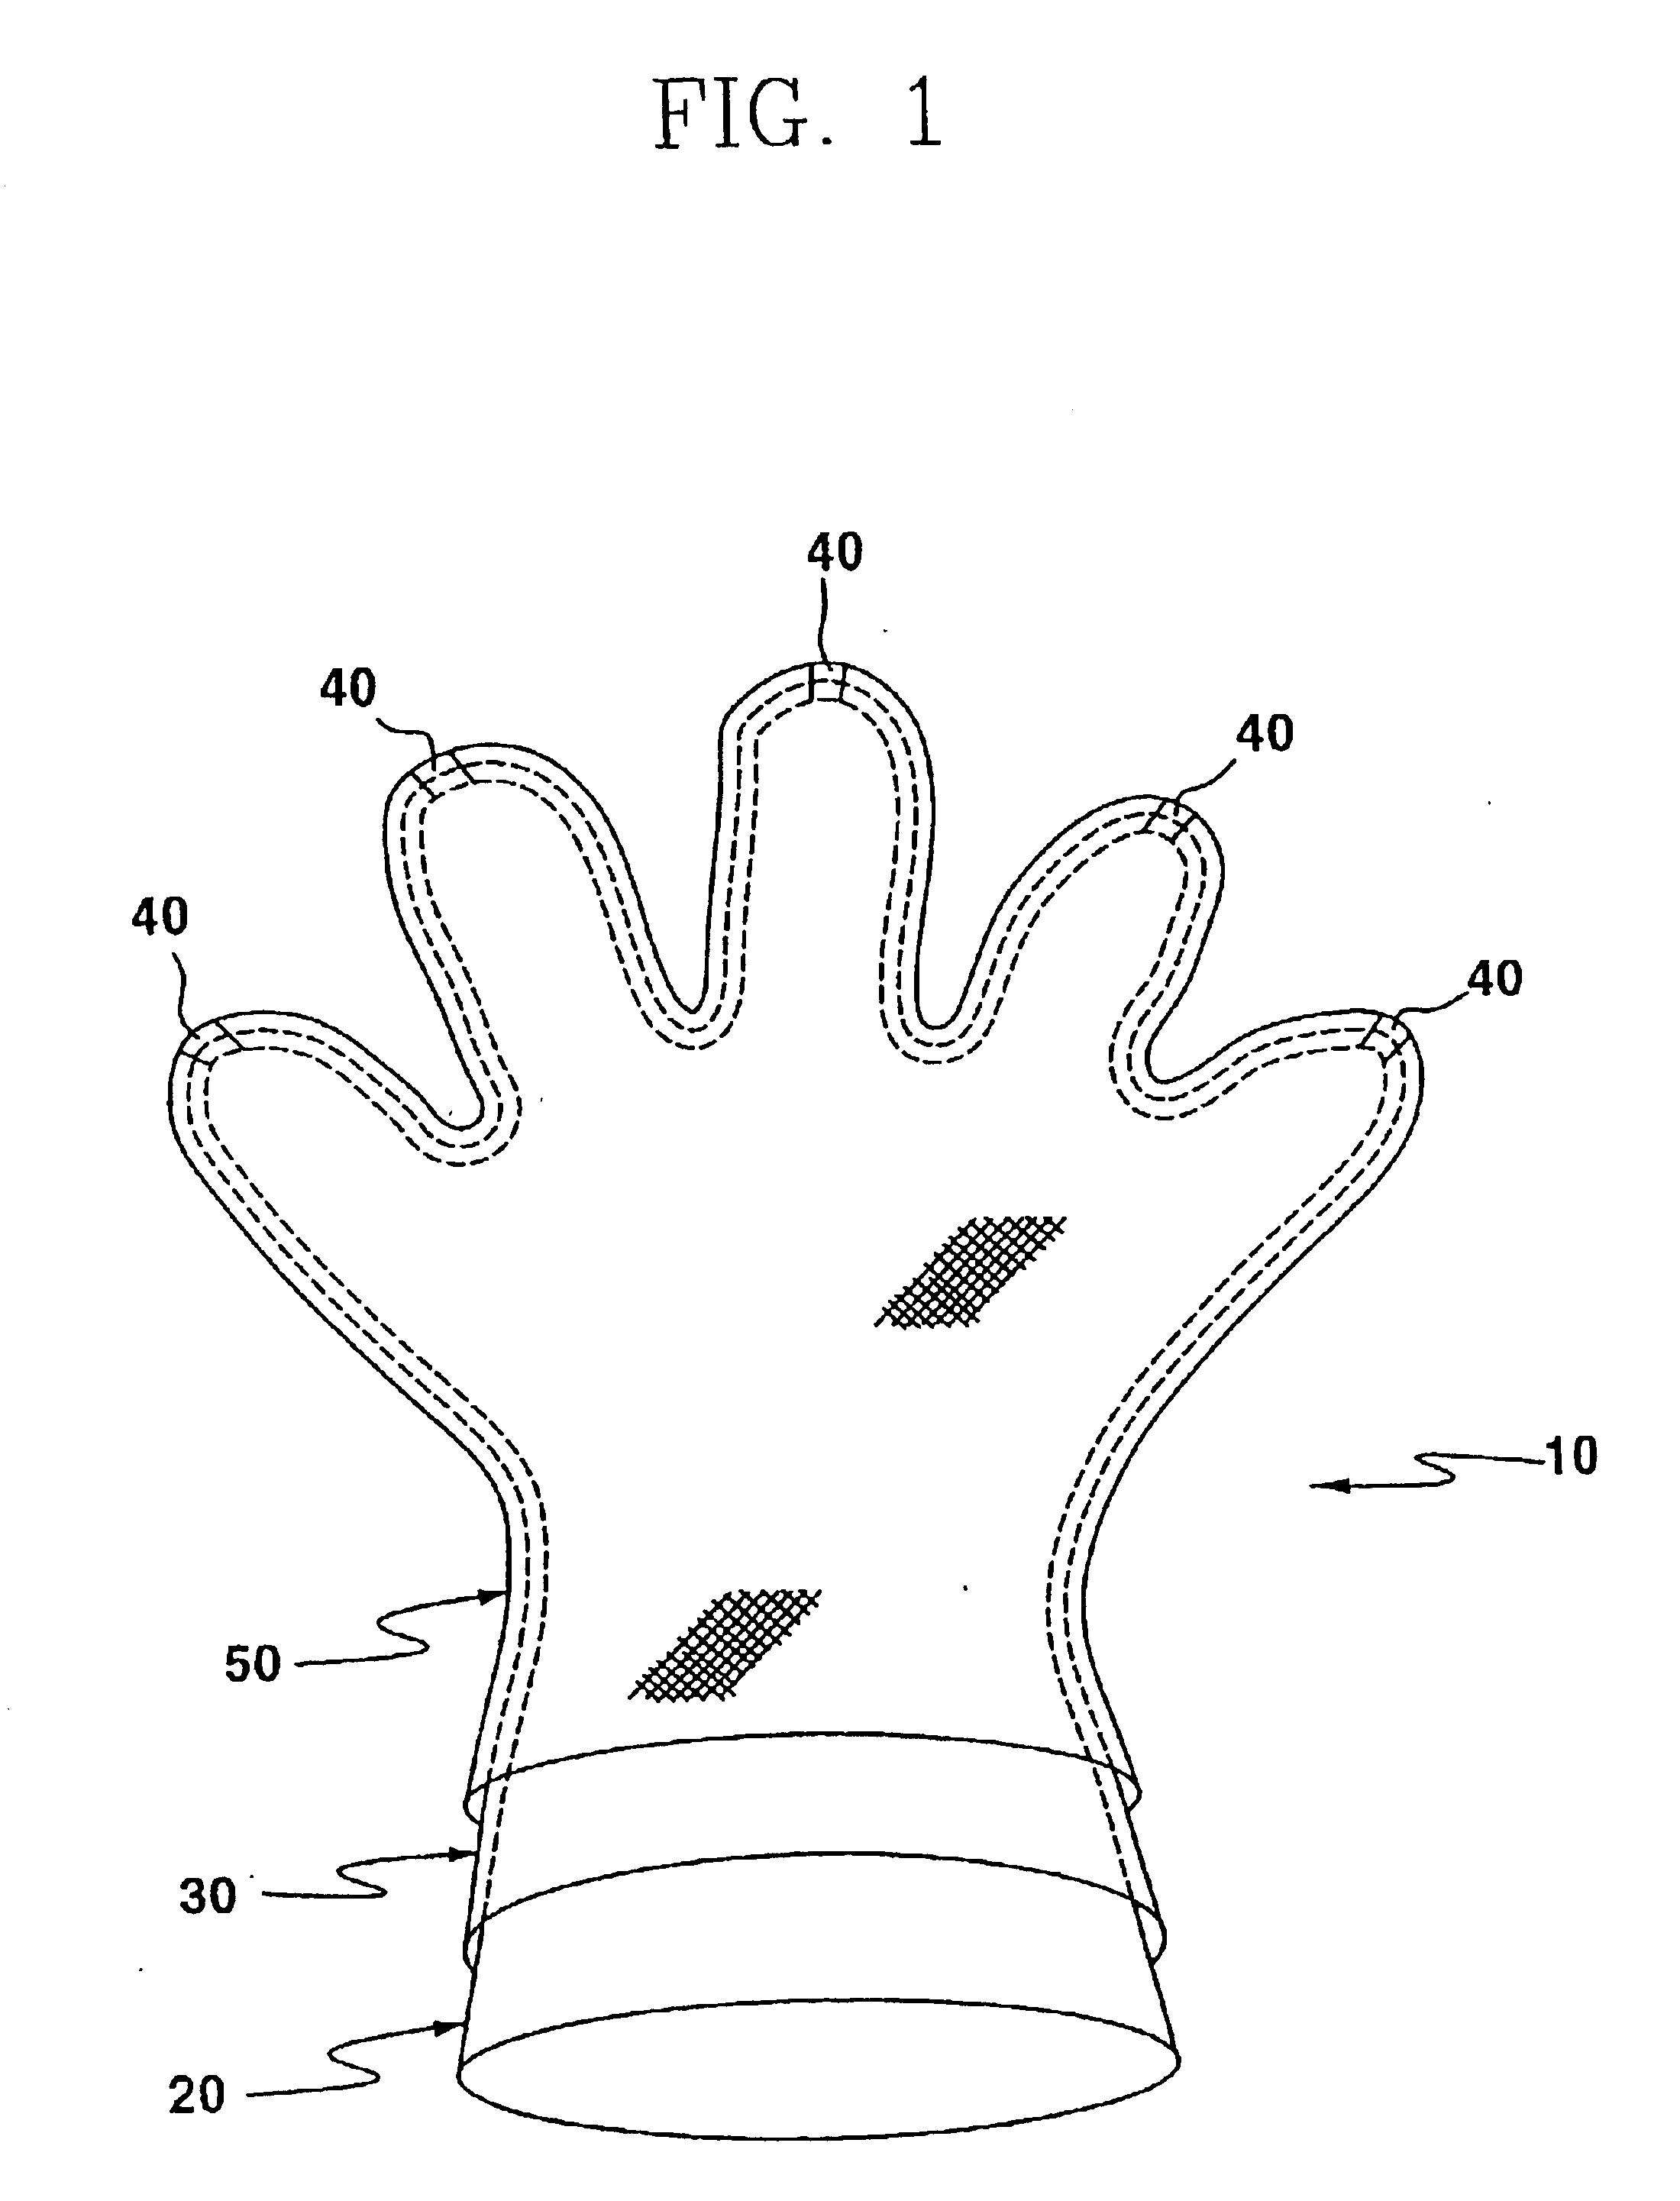 Inner cloth for glove and glove fabricated using the same